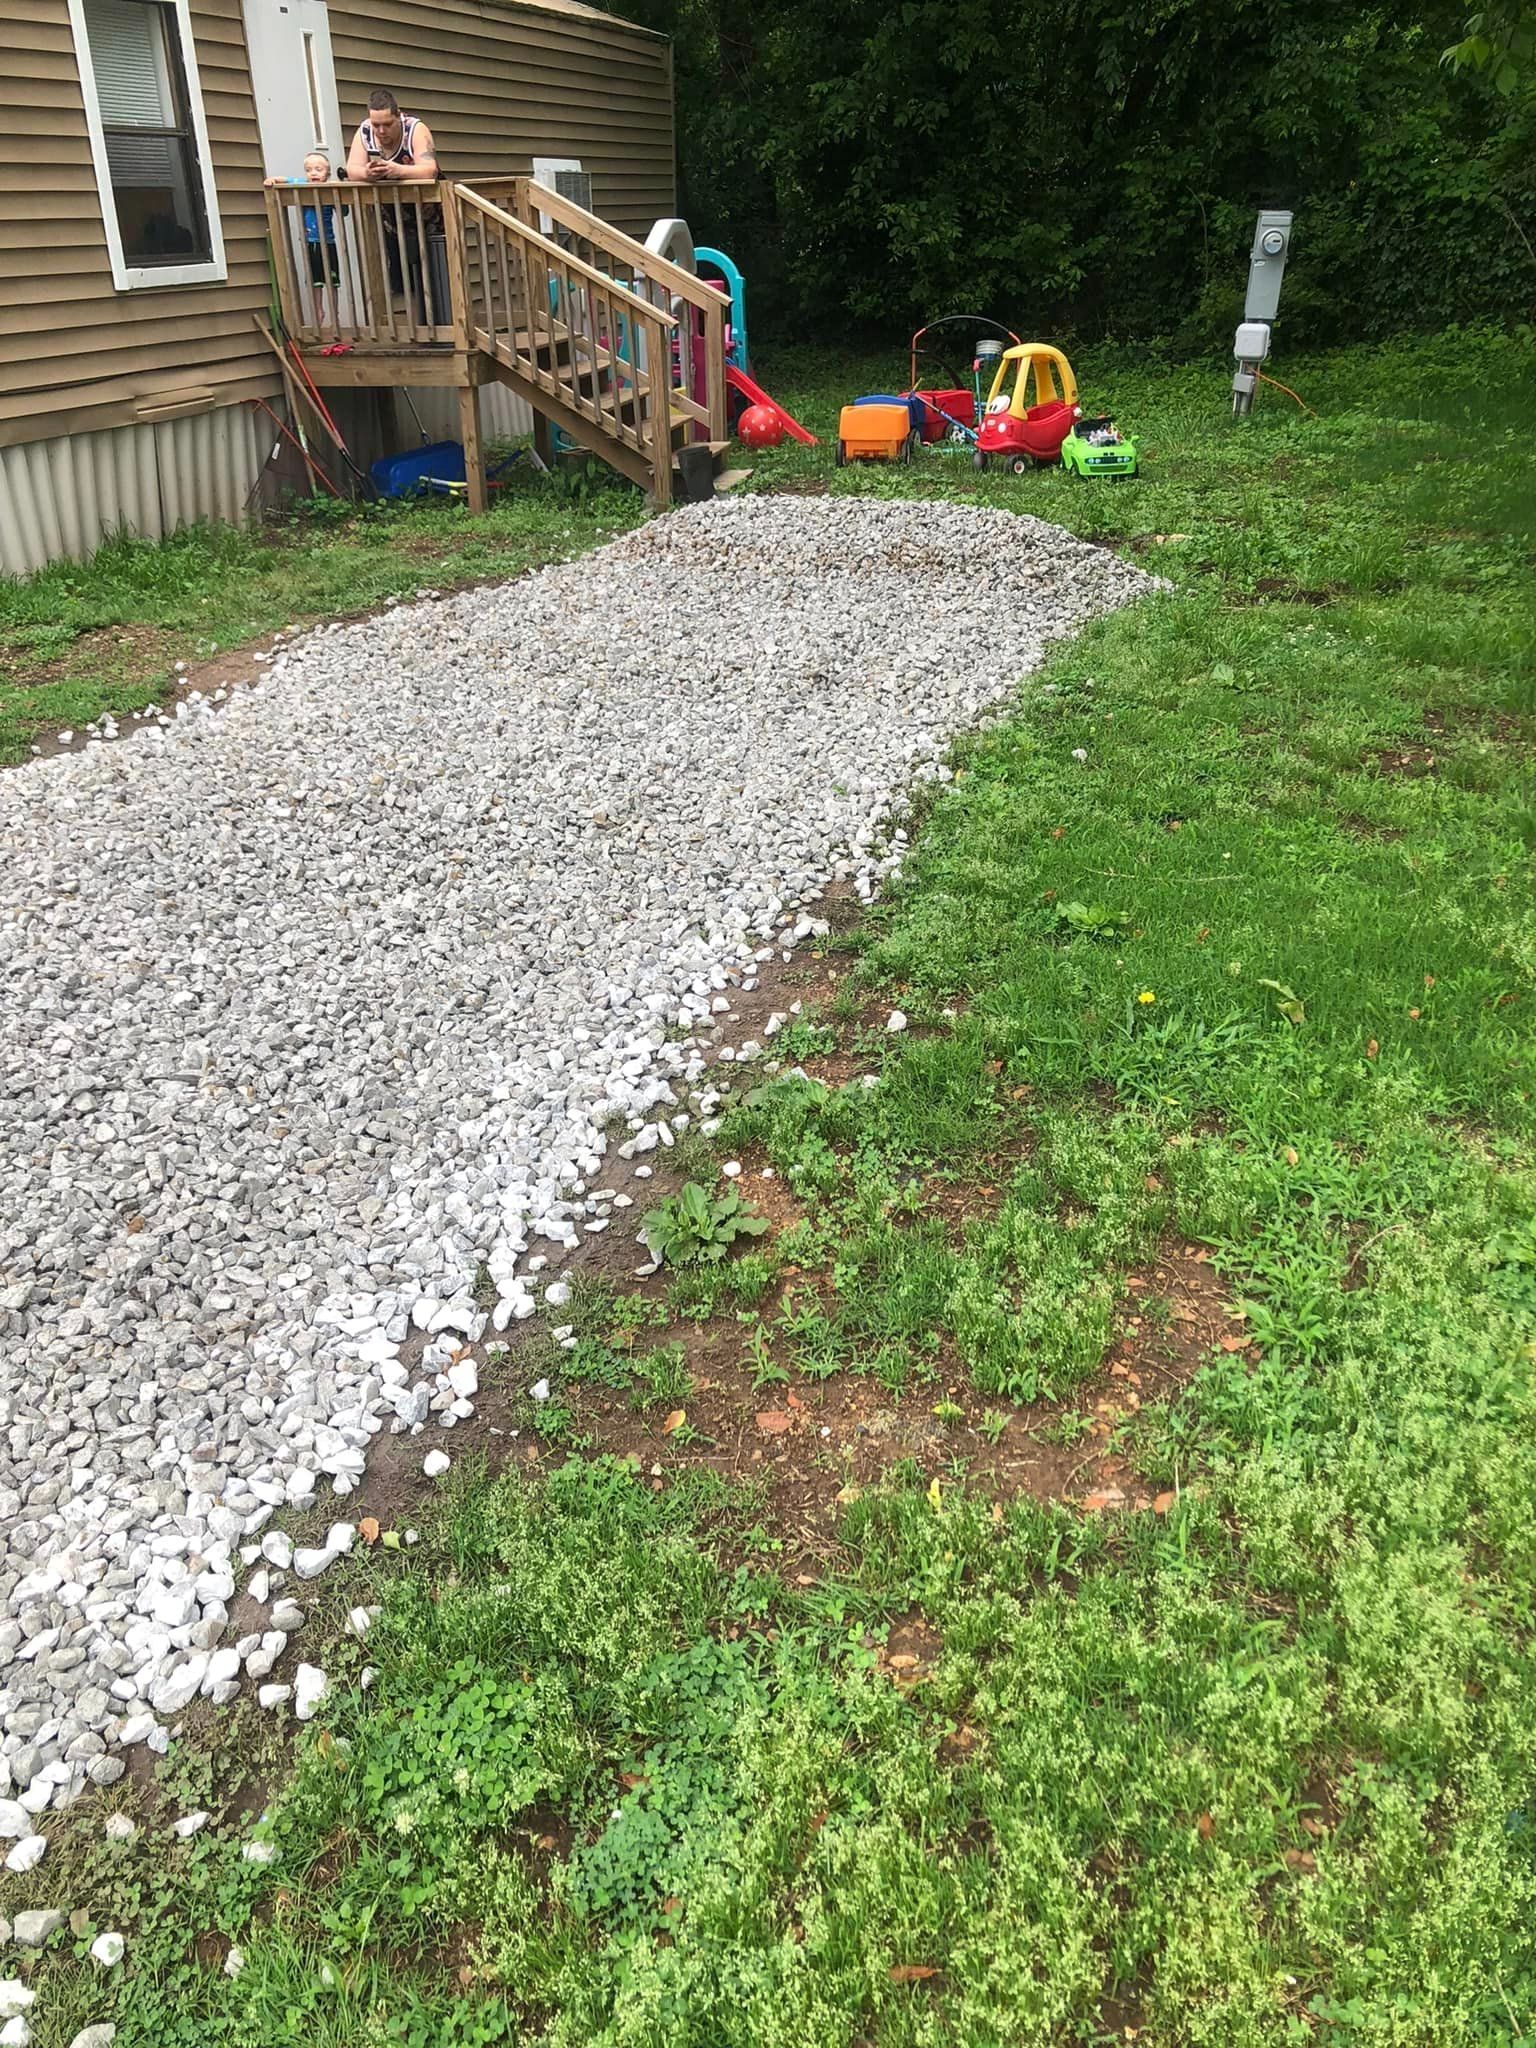 A gravel driveway leading to a house with toys in the grass.